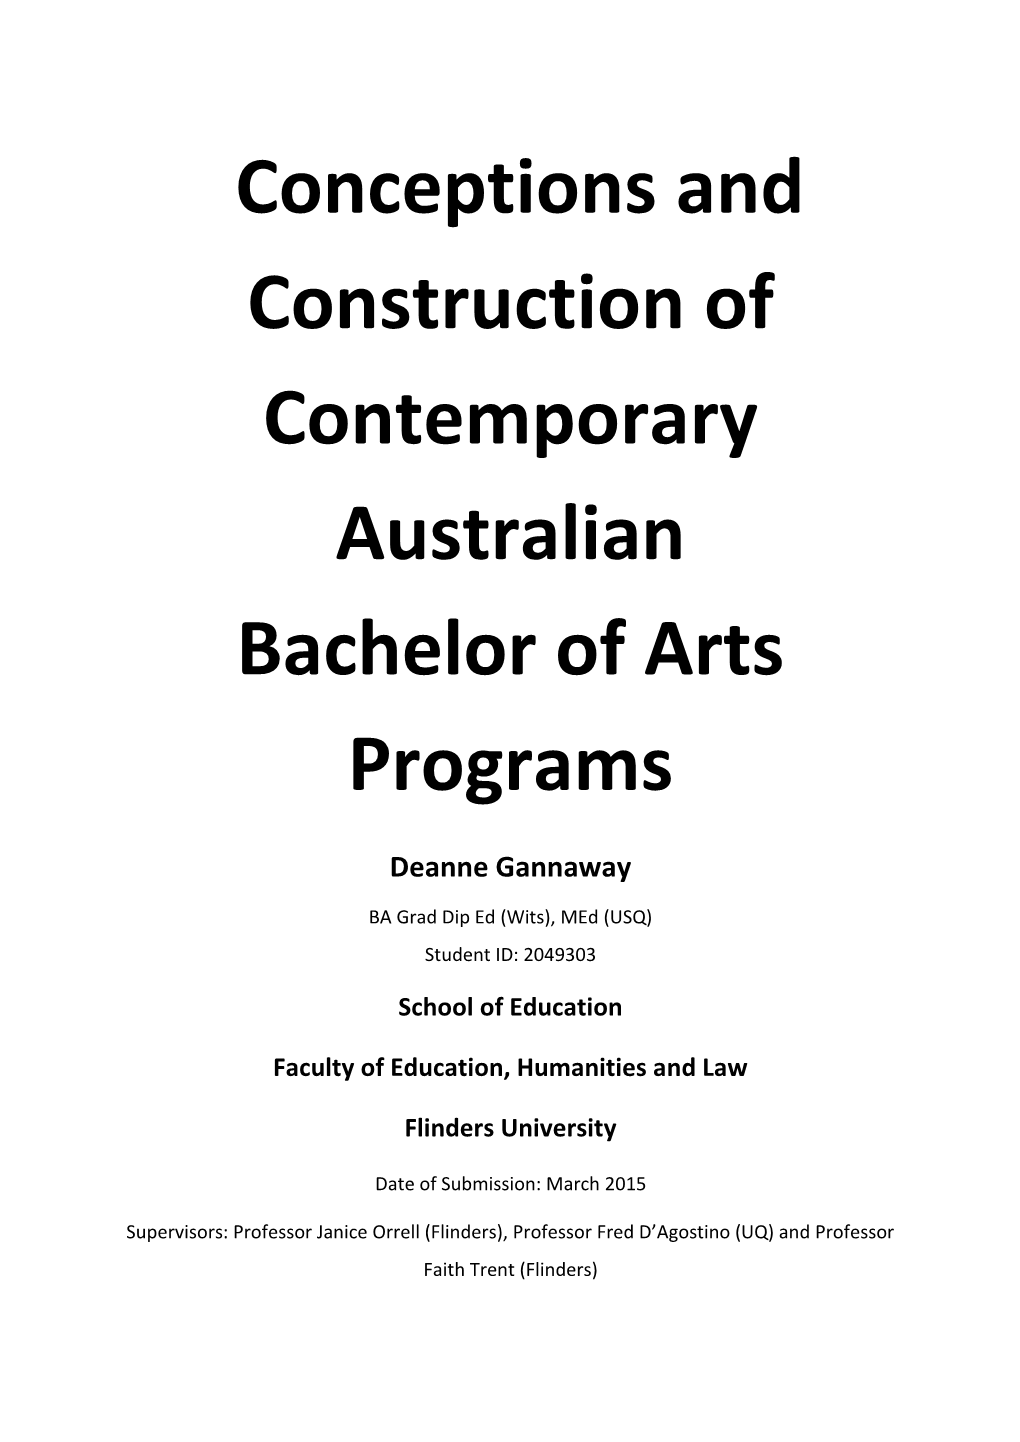 Conceptions and Construction of Contemporary Australian Bachelor of Arts Programs